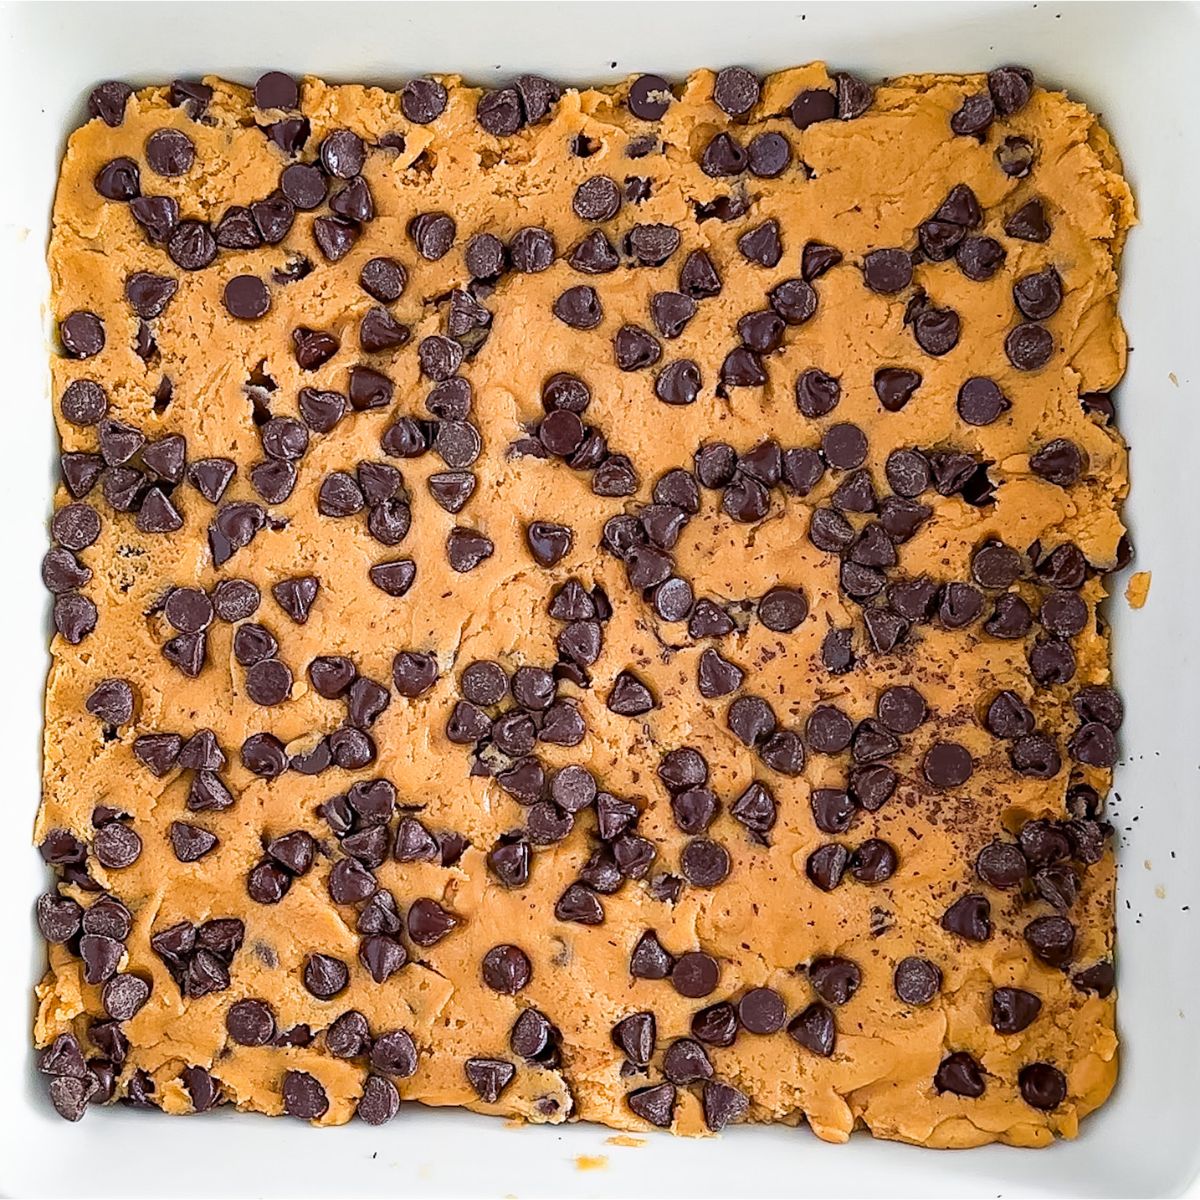 Peanut butter chocolate chip cookie bars in a baking dish.